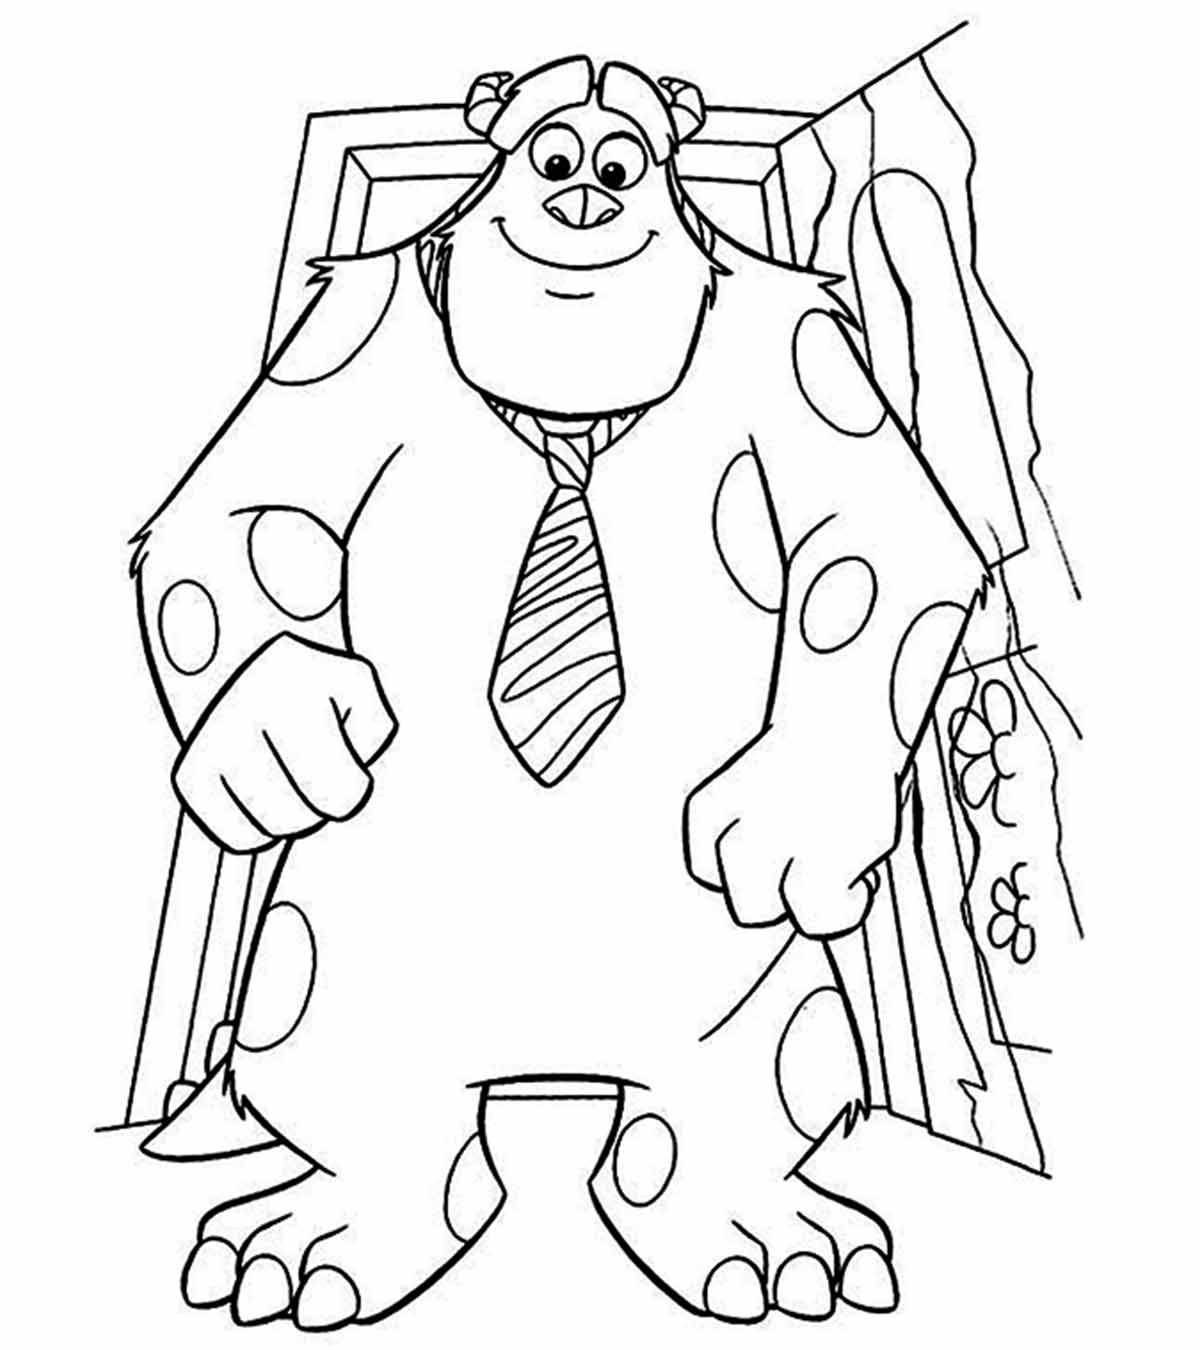 Monsters Inc Coloring Pages Pdf / Monsters Inc Coloring Pages 26 Free